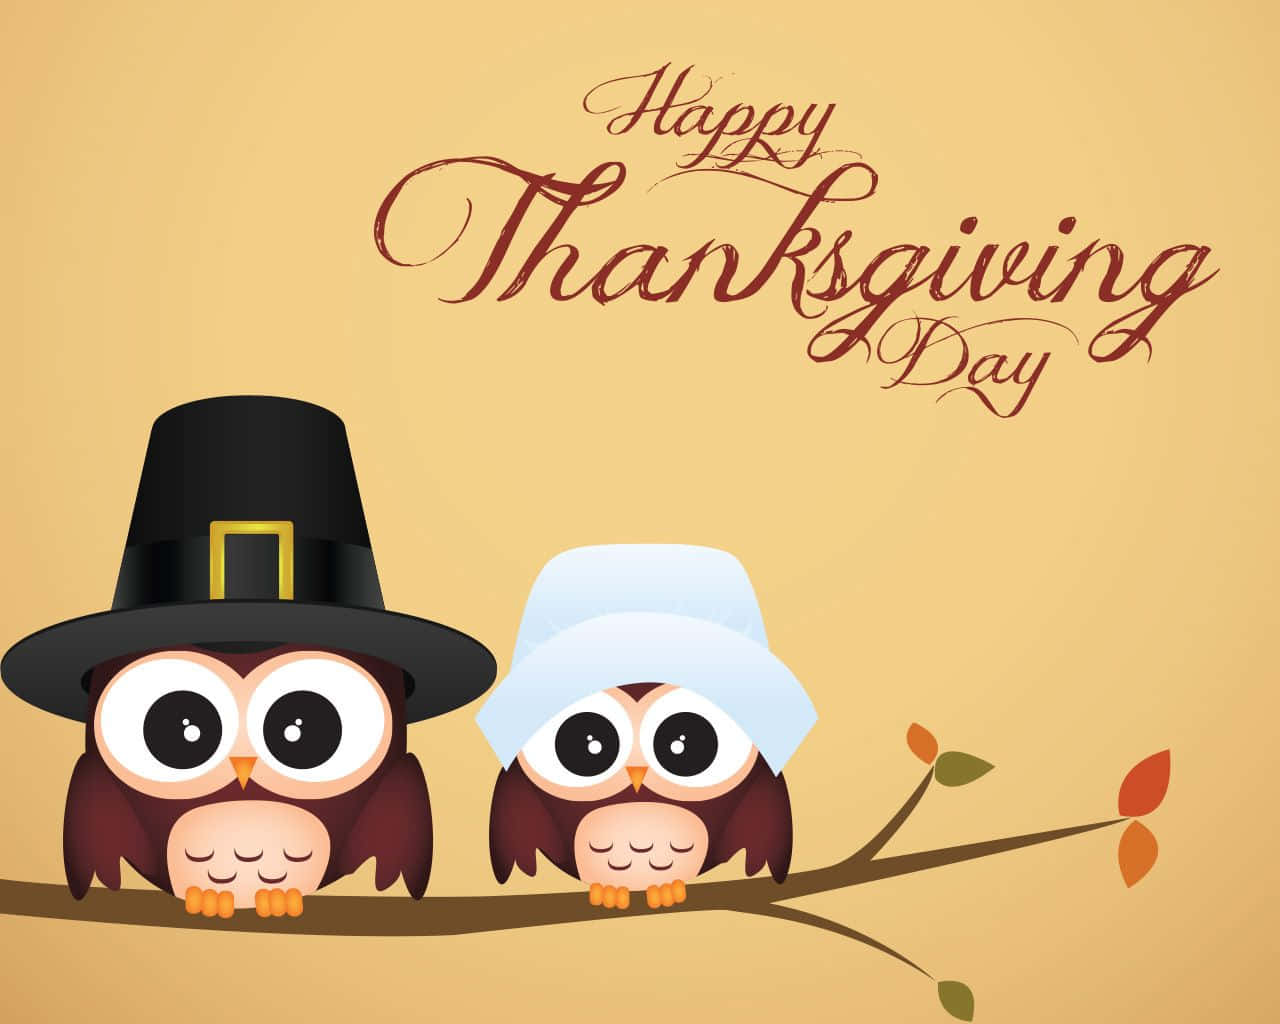 Celebrate Thanksgiving with Friends and Family